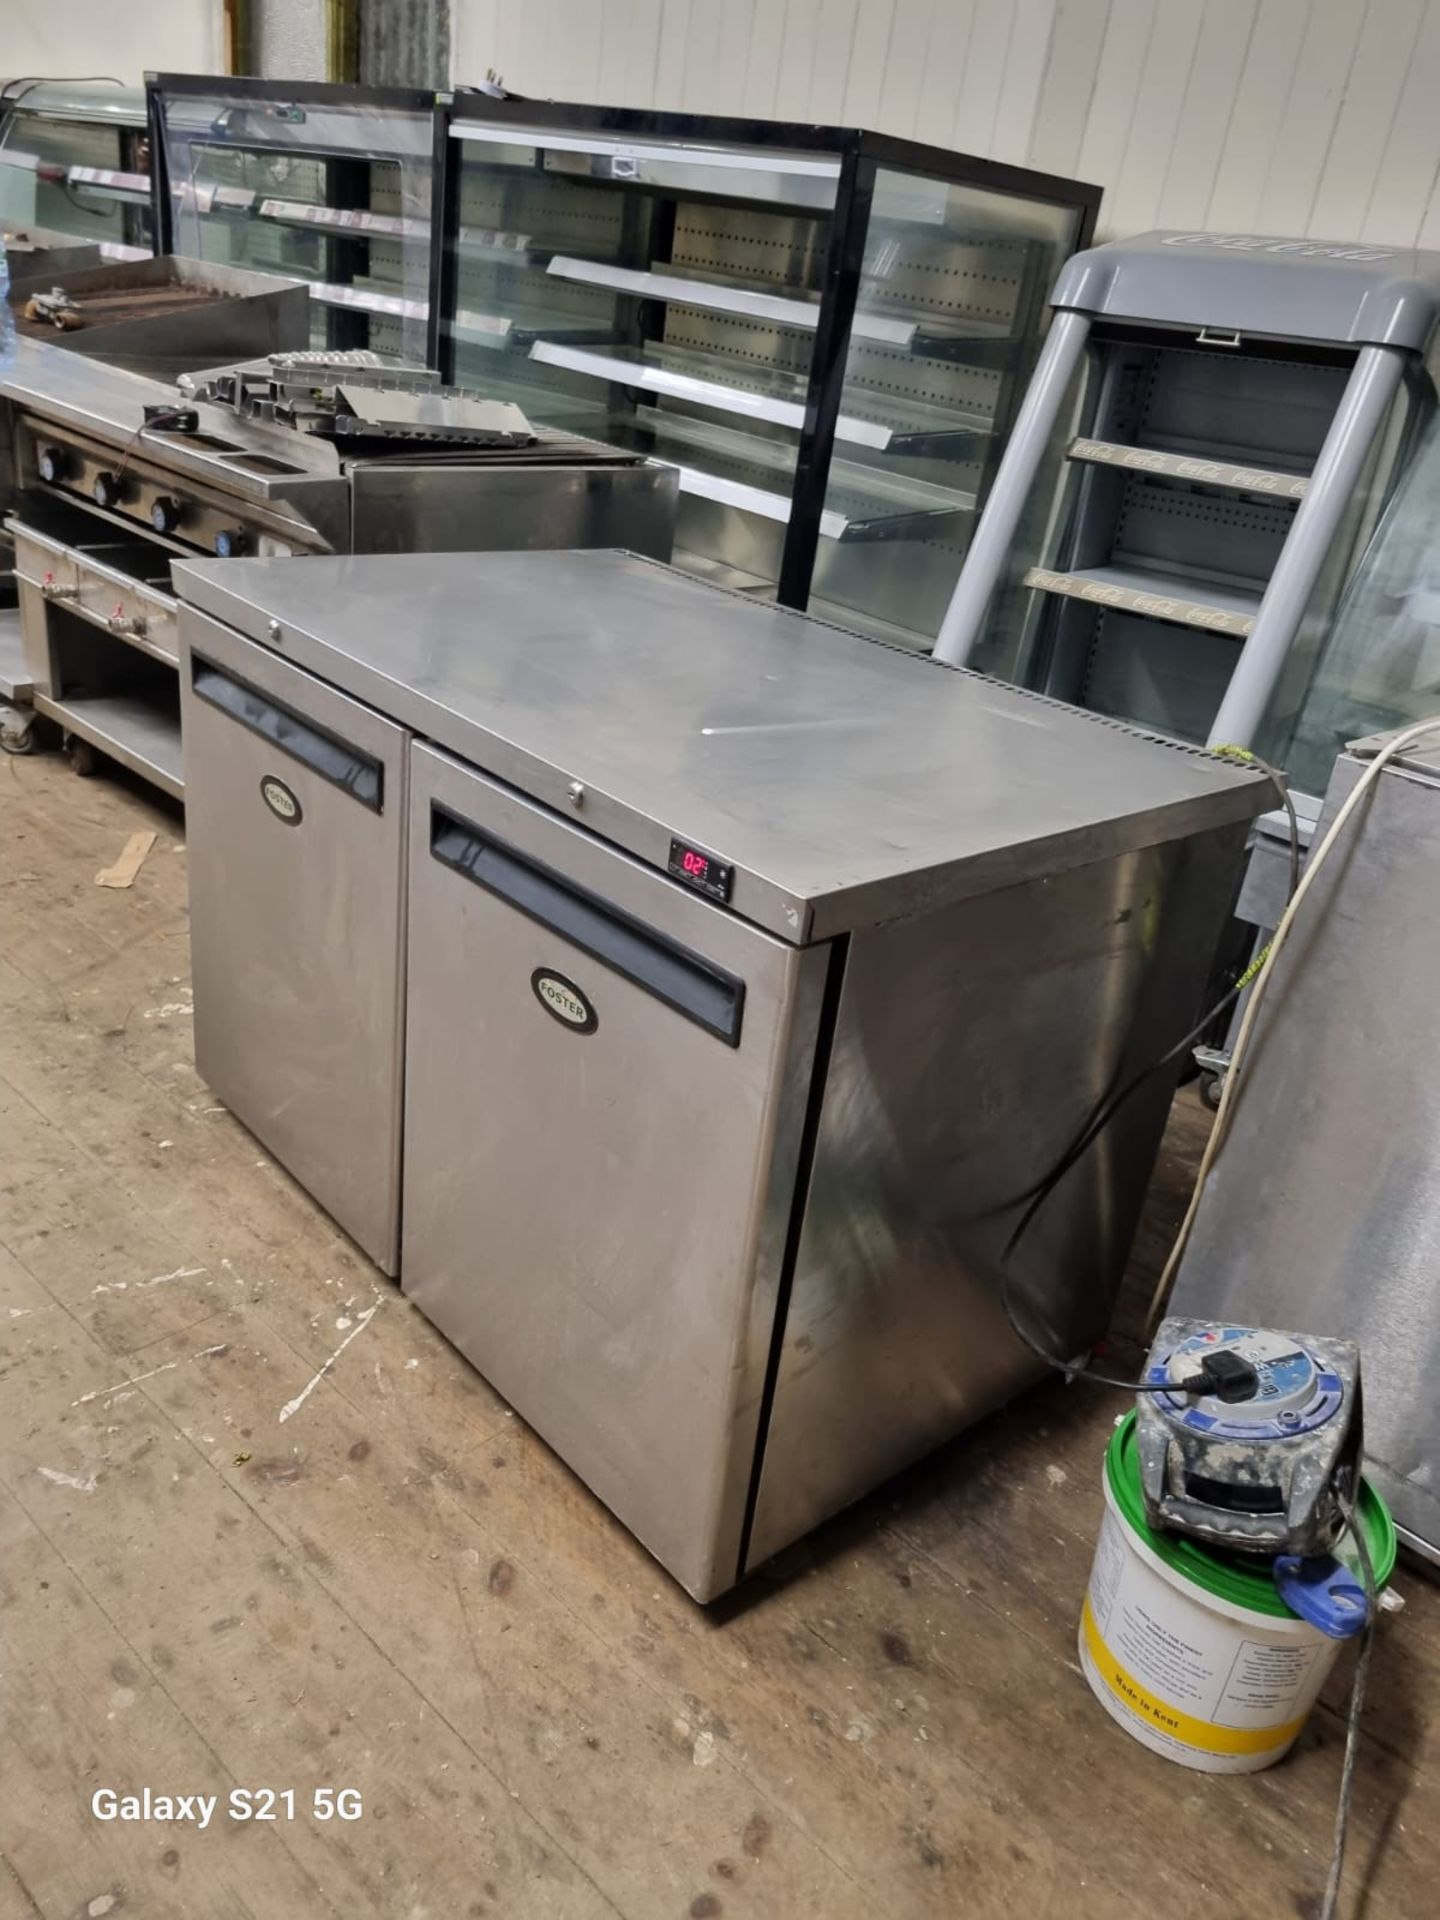 FOSTER HR360 UNDER COUNTER FRIDGE - 1200 MM W 700 MM D - FULLY WORKING - Image 2 of 6